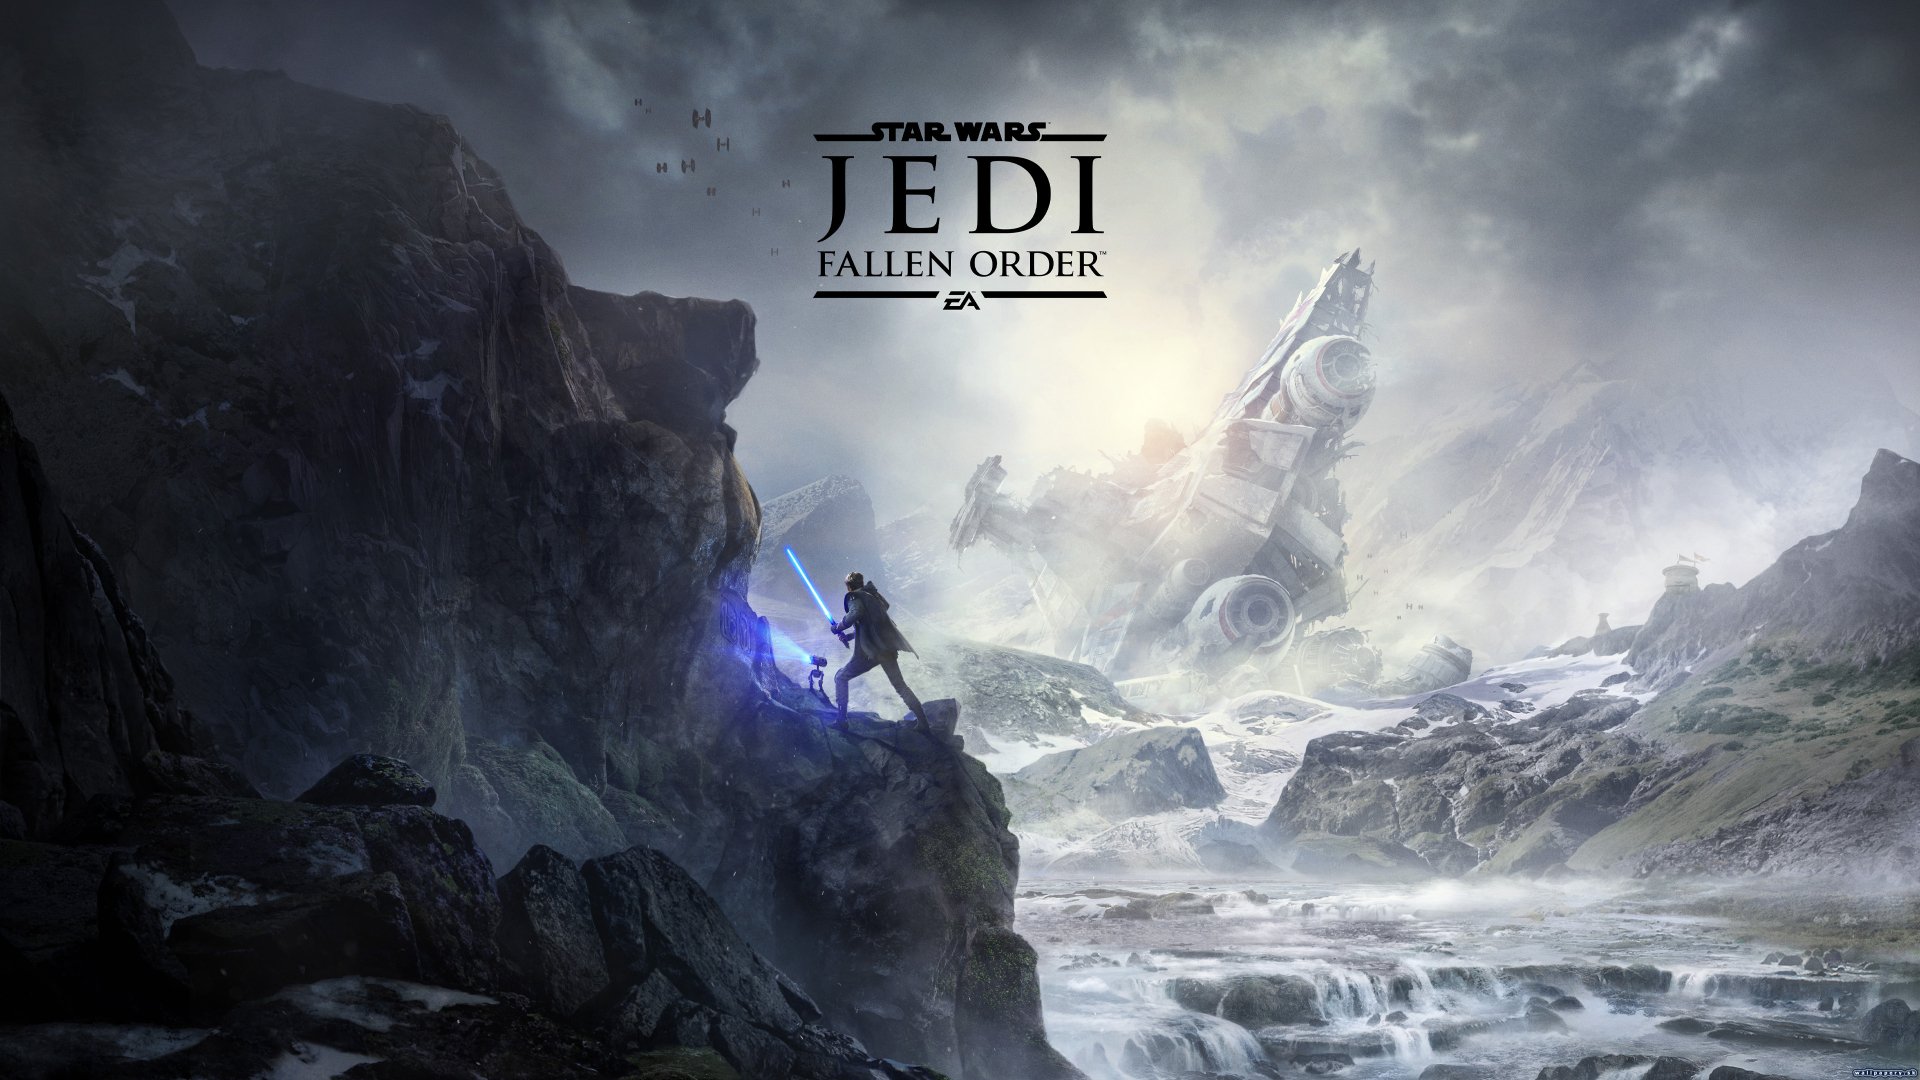 61 Star Wars Jedi Fallen Order Hd Wallpapers Background Images Wallpaper Abyss